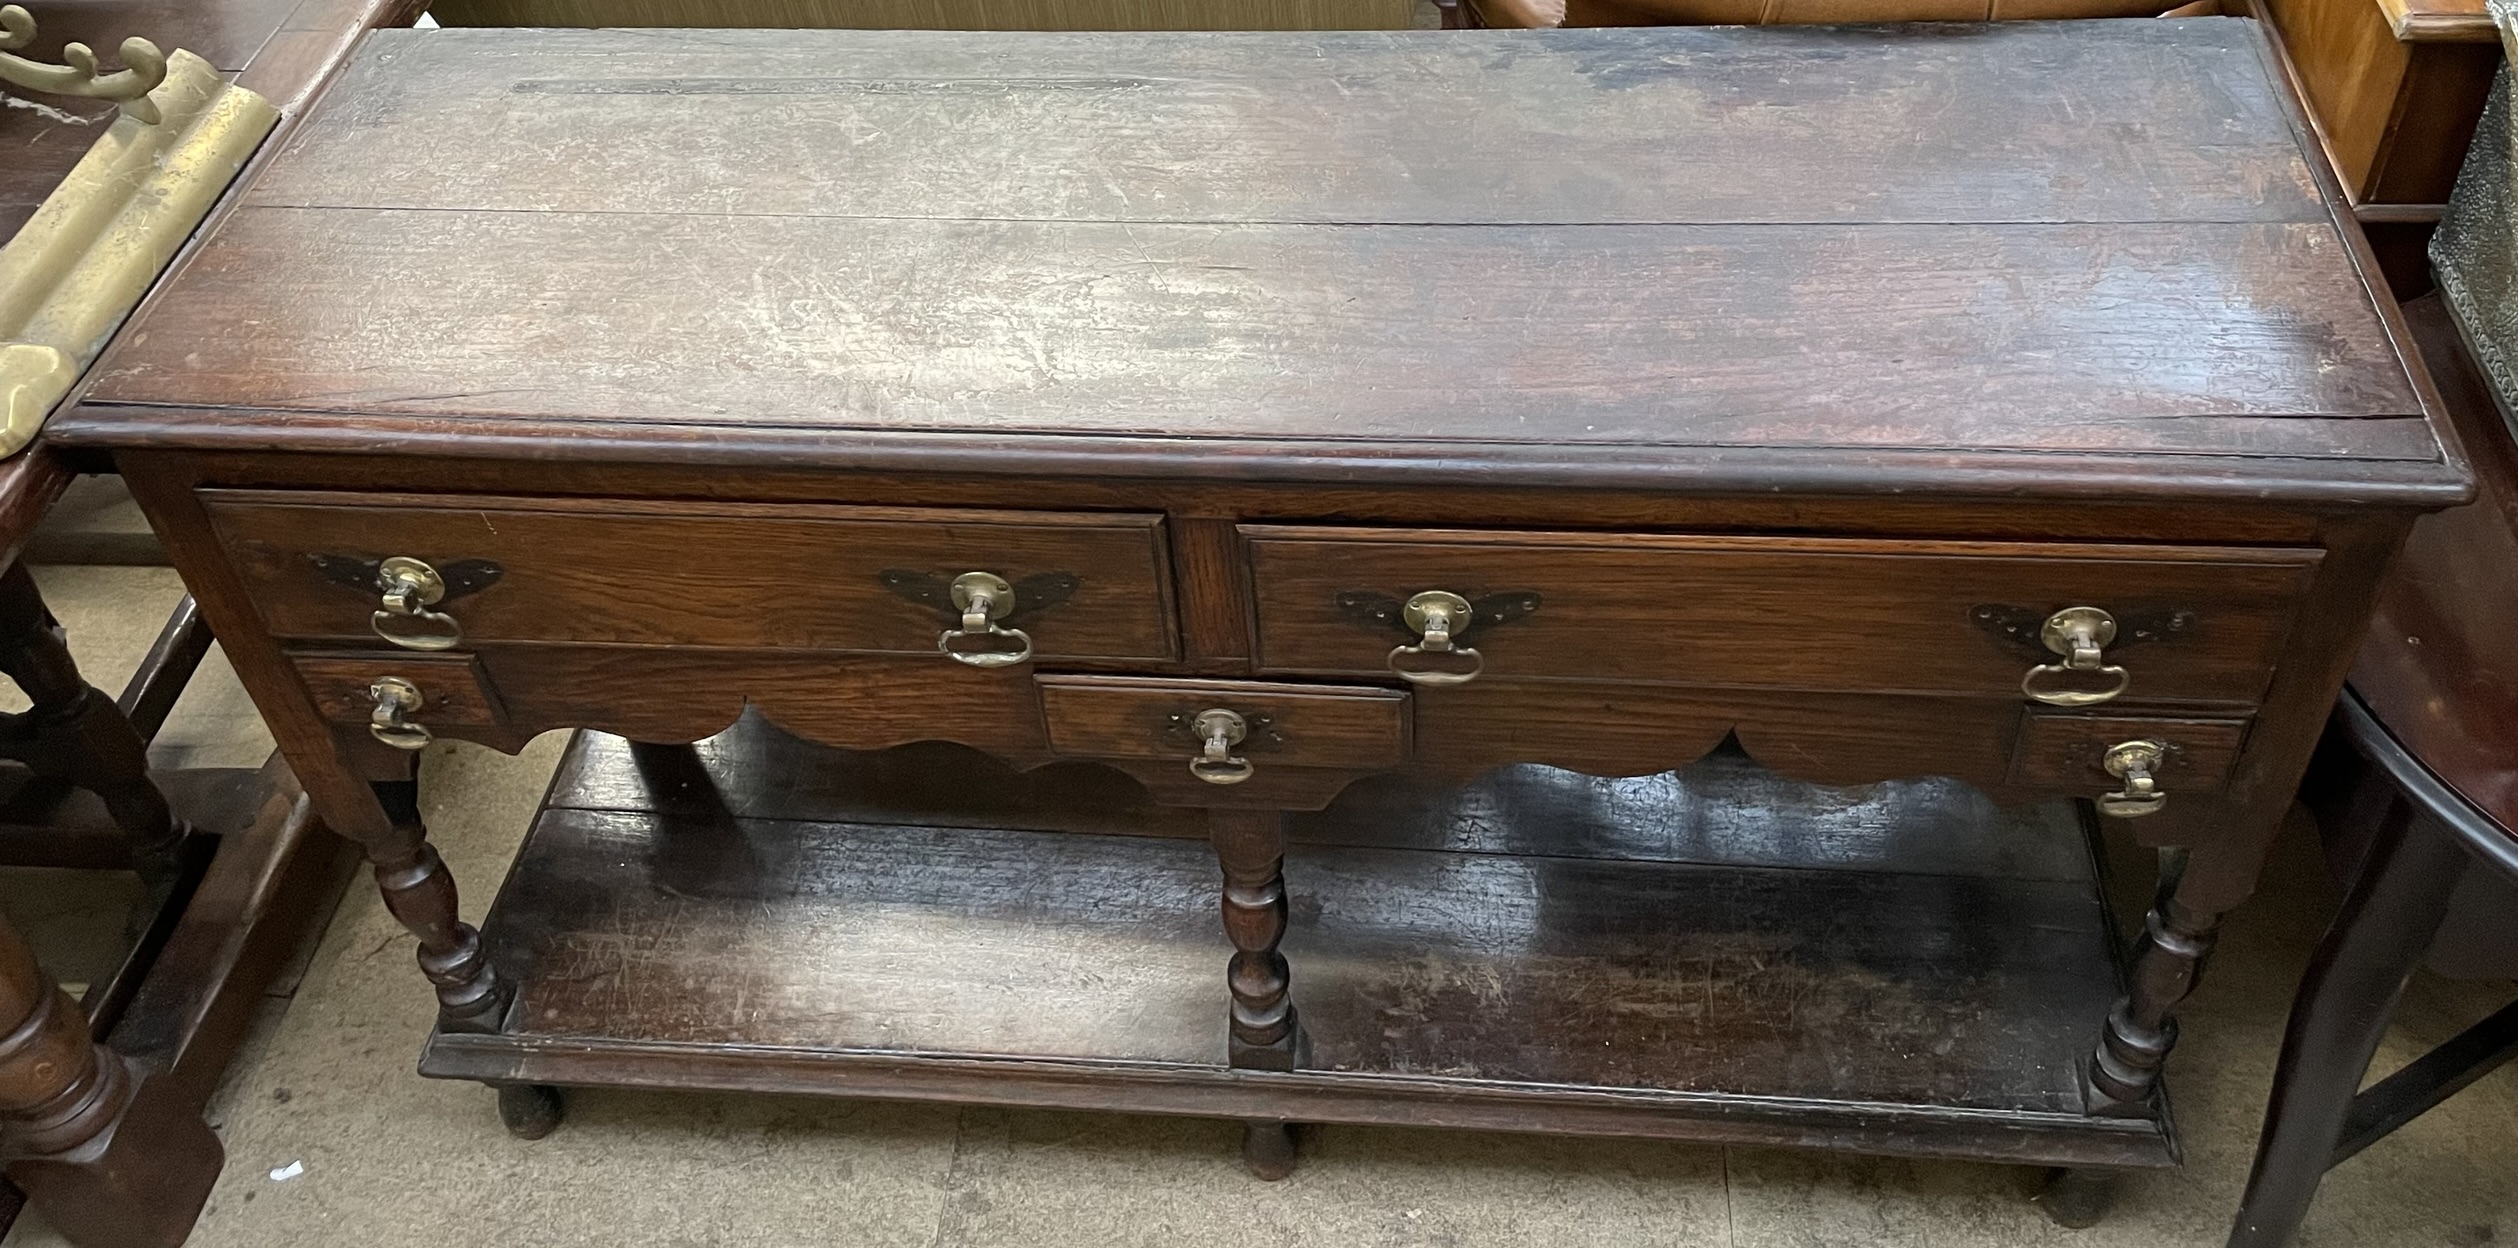 A 19th century oak dresser base with a planked rectangular top above five drawers and turned legs